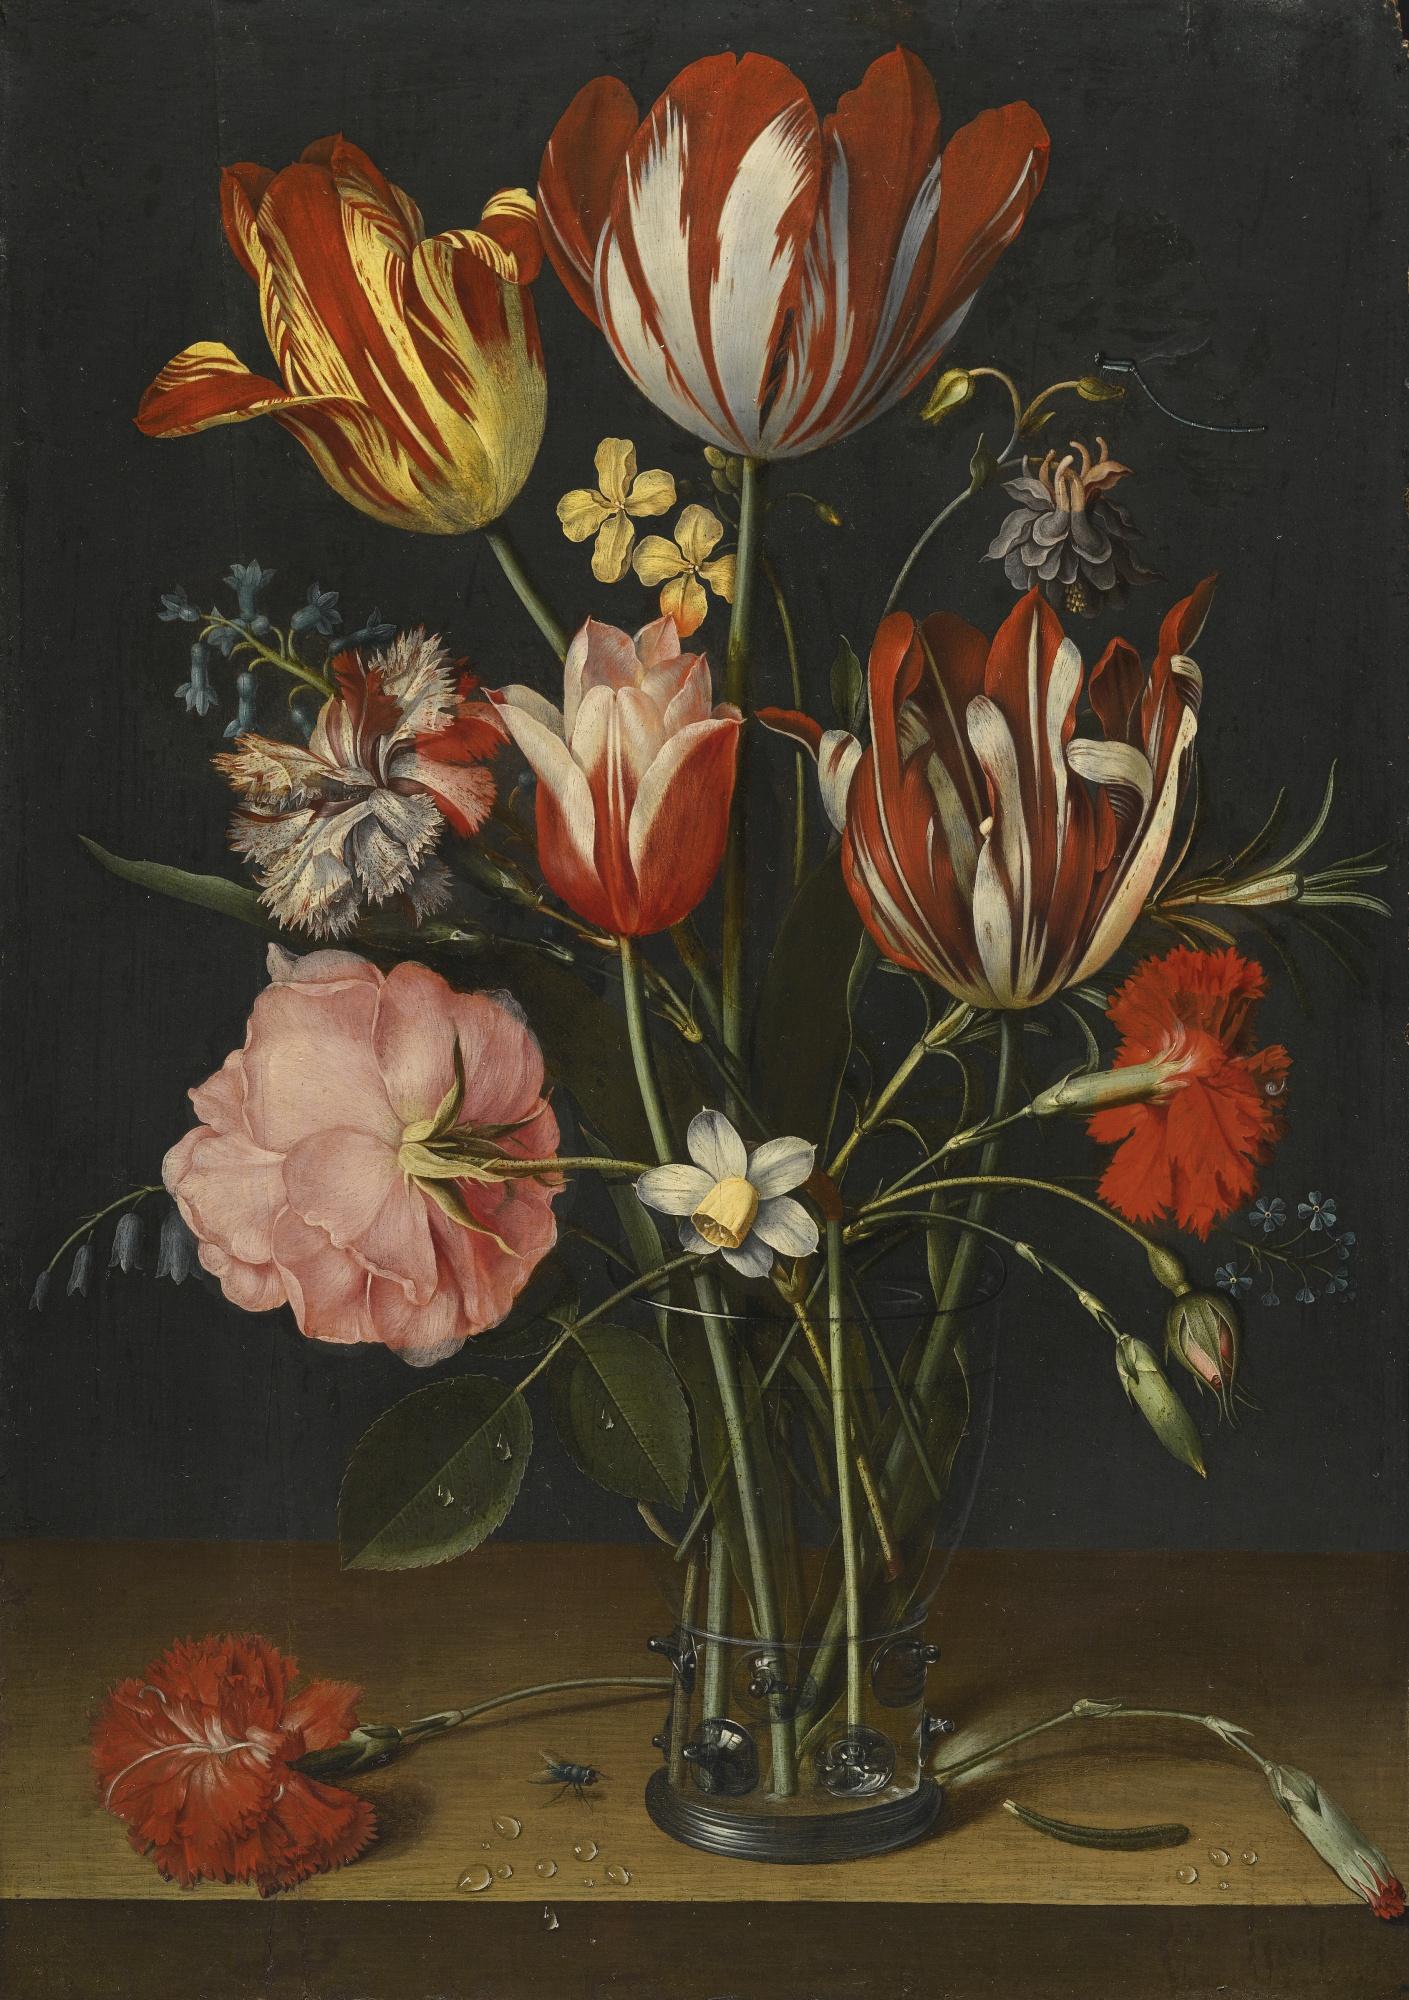 Still Life Of Tulips, Carnations, A Rose And Other Flowers In A Glass  Beaker Resting On A Wooden Ledge by Jacob Van Hulsdonck